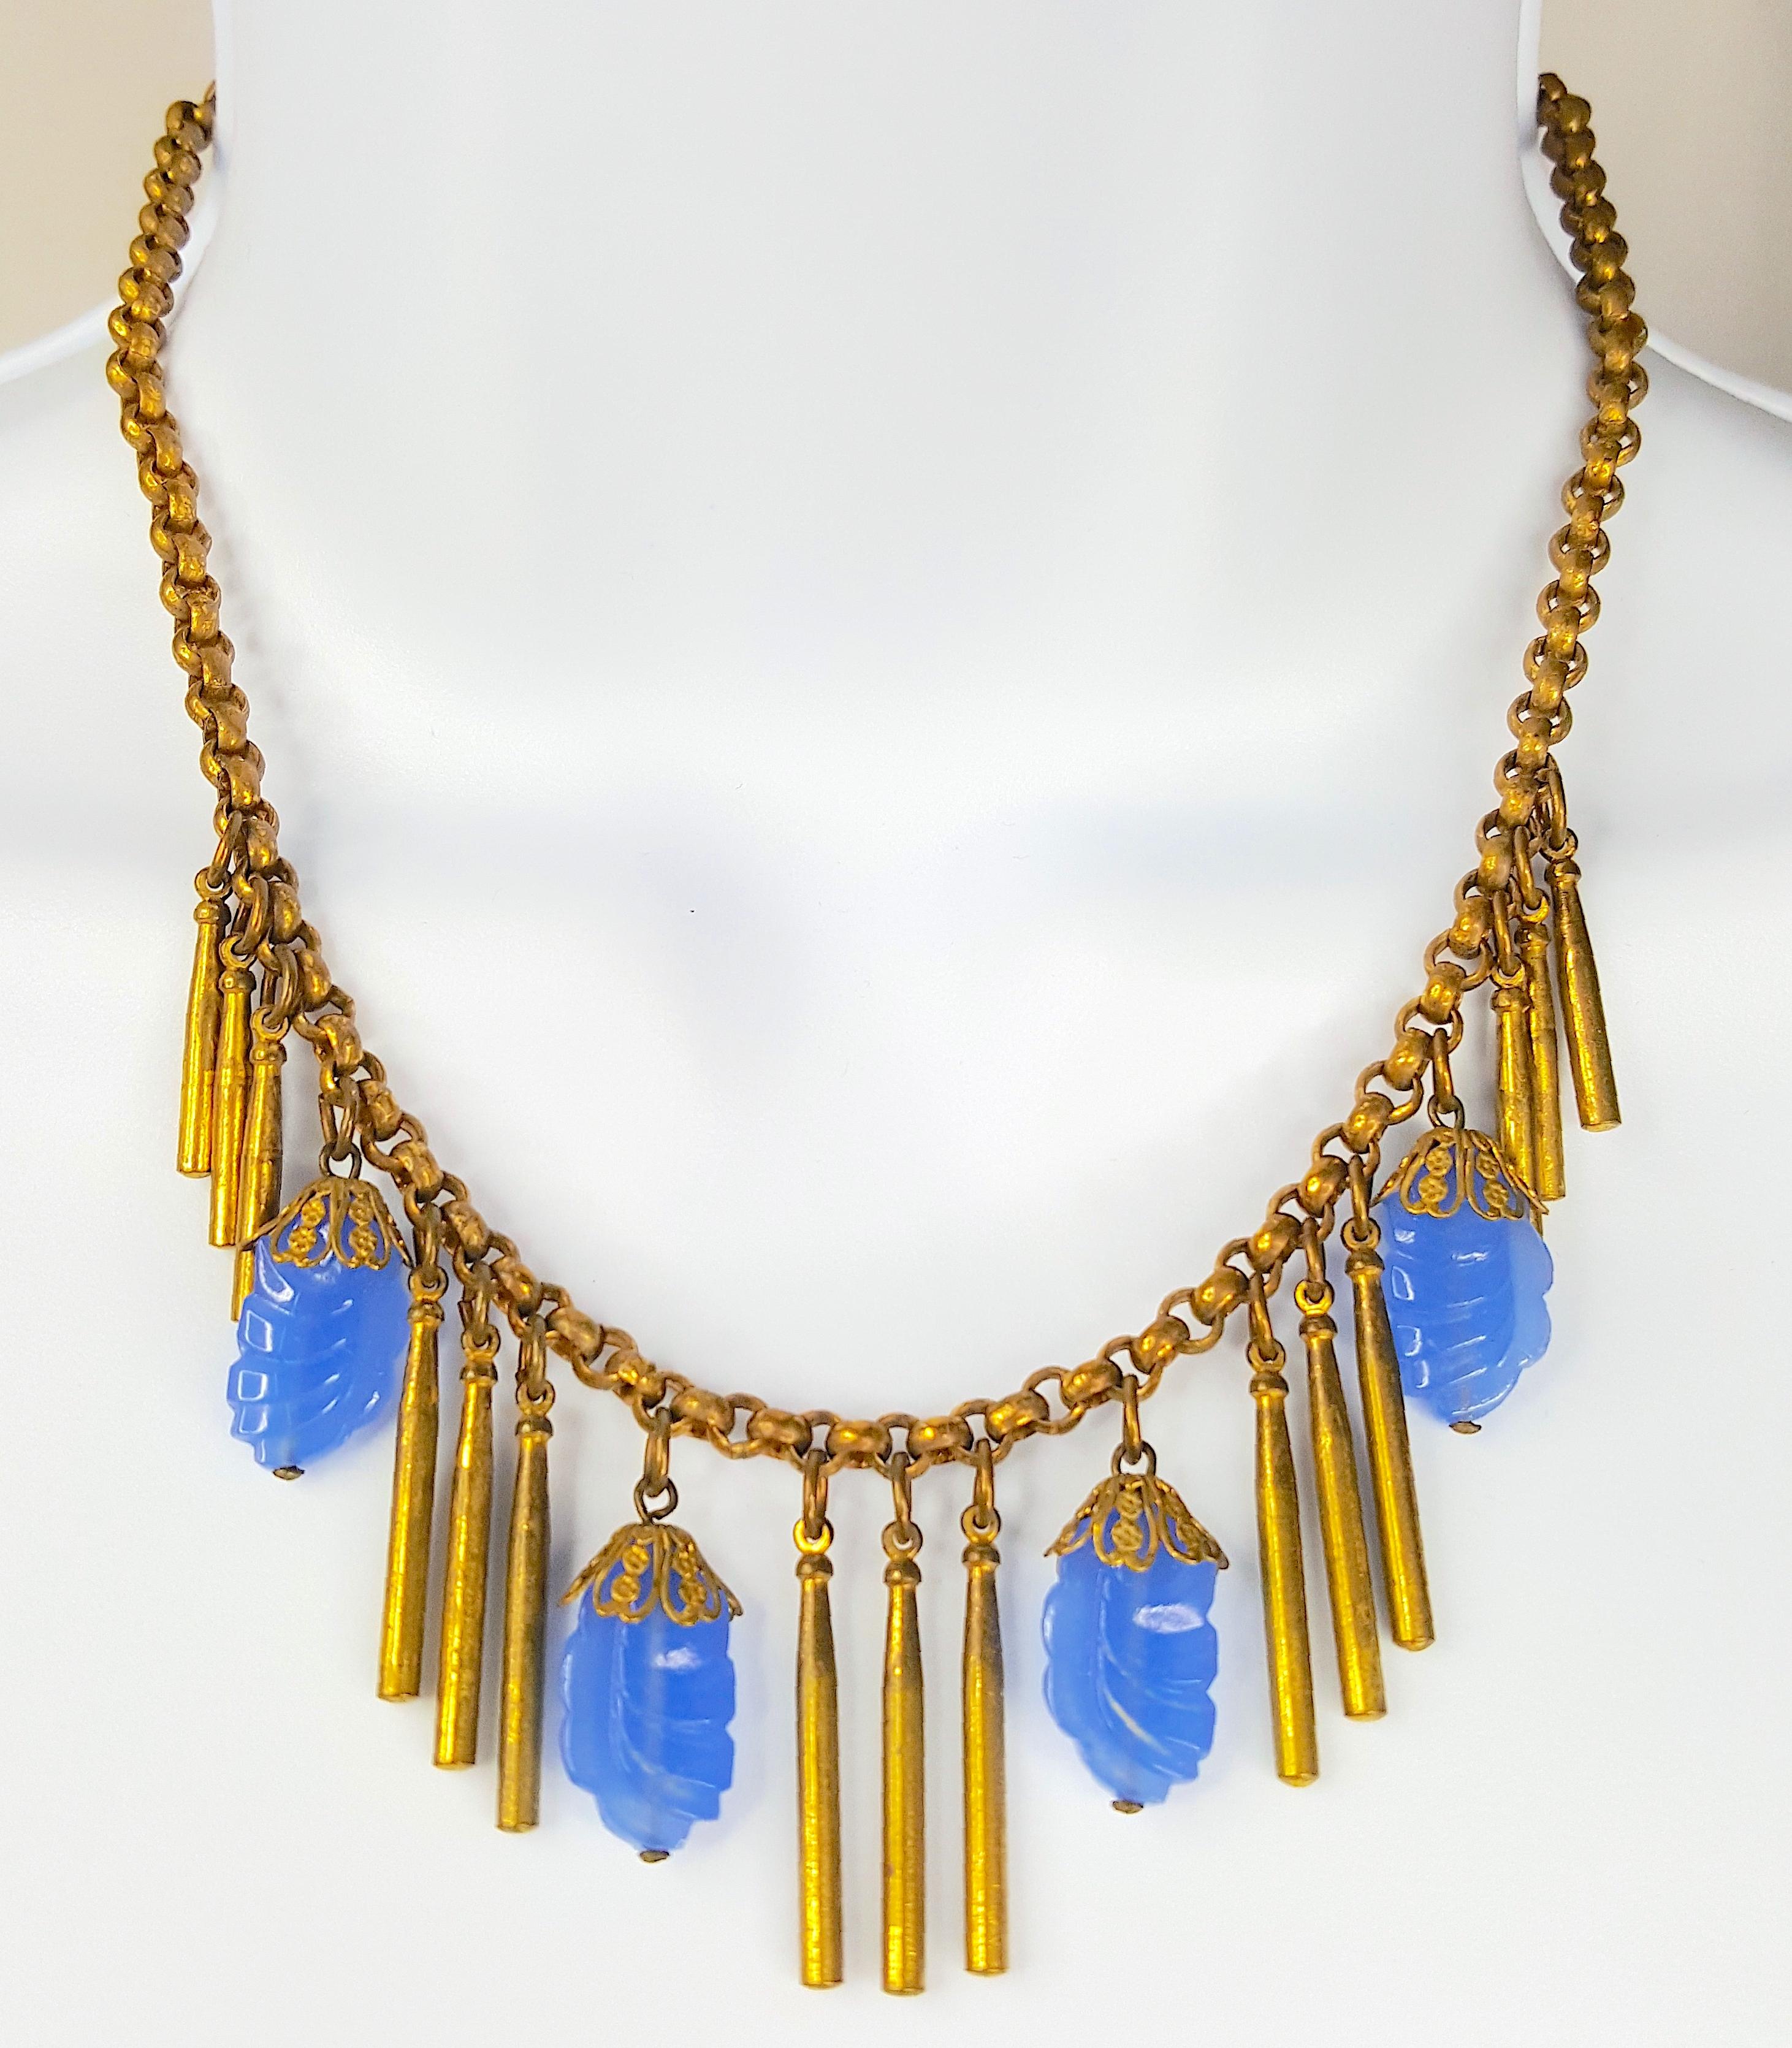 Featuring a relatively heavy fringe of dangling Russian-gilt brass bars and contrasting French-blue textural hand-pressed glass beads topped with filigree caps to resemble flower buds, this c.1930 brass round-link chain necklace was made in an Art